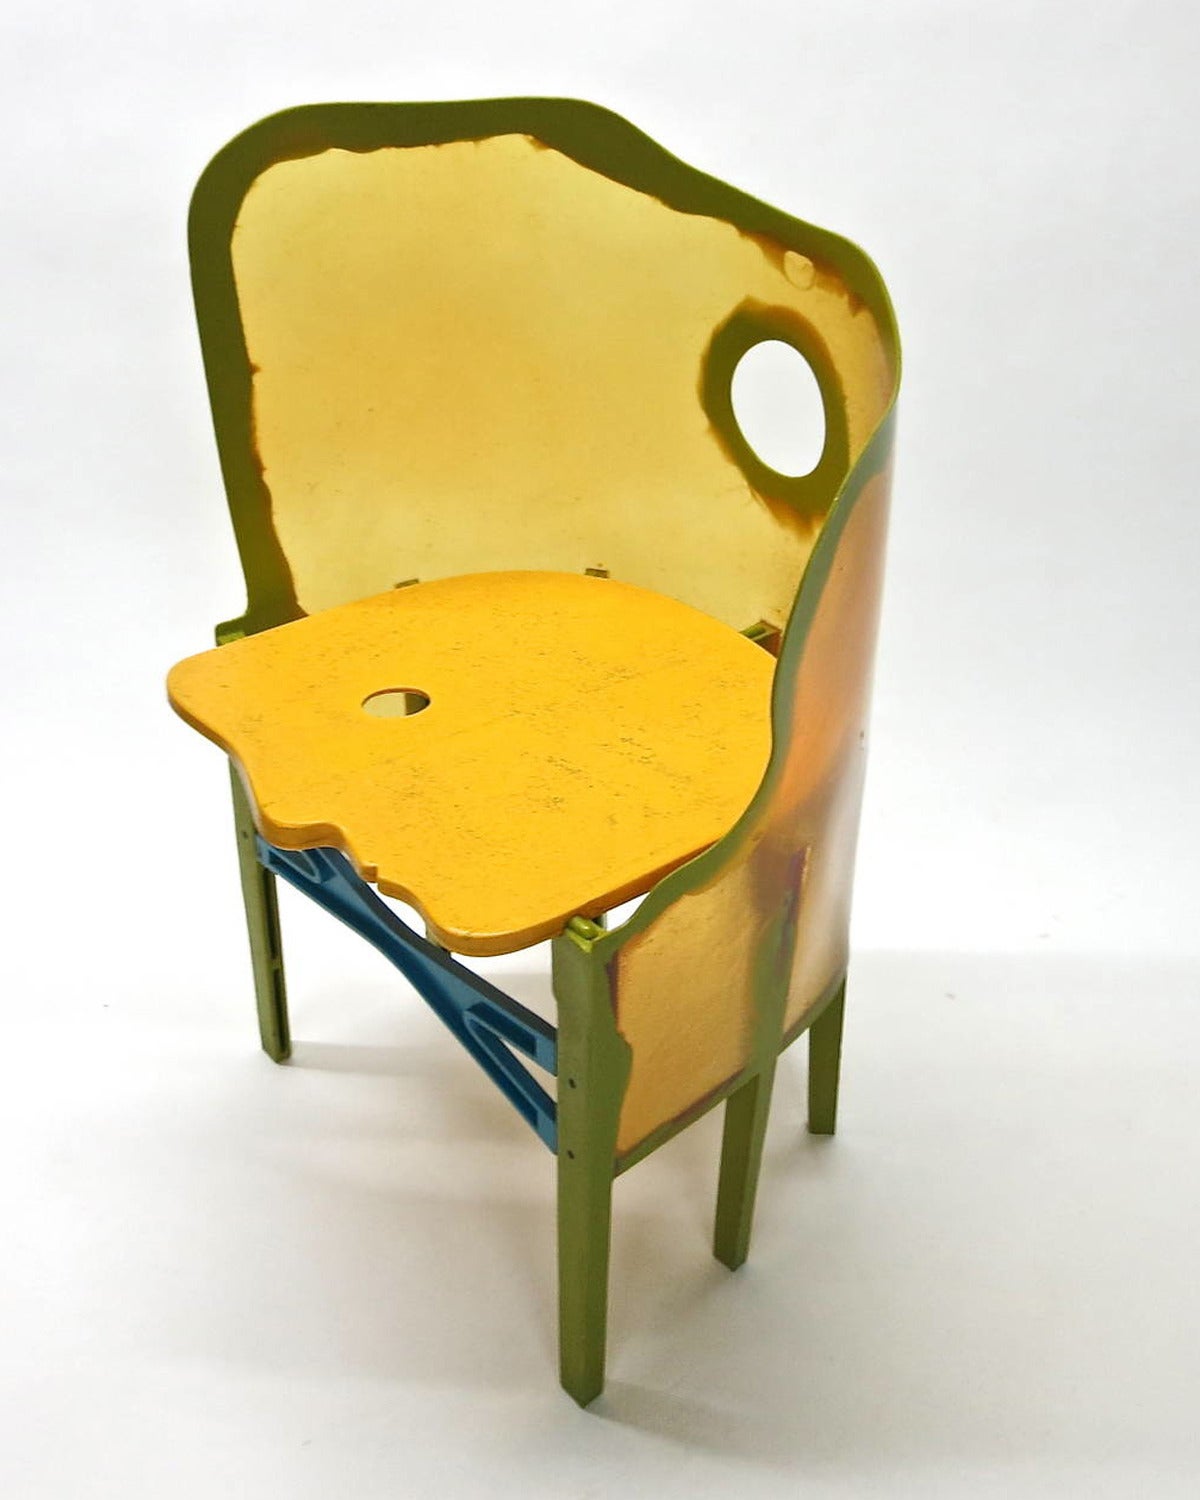 One of the first Crosby chairs from The Open Sky Collection that were made by Gaetano Pesce in 1995 from his Crosby Street studio. They were acquired directly from their only owner who purchased them from a Soho gallery. Each chair's seat is in the